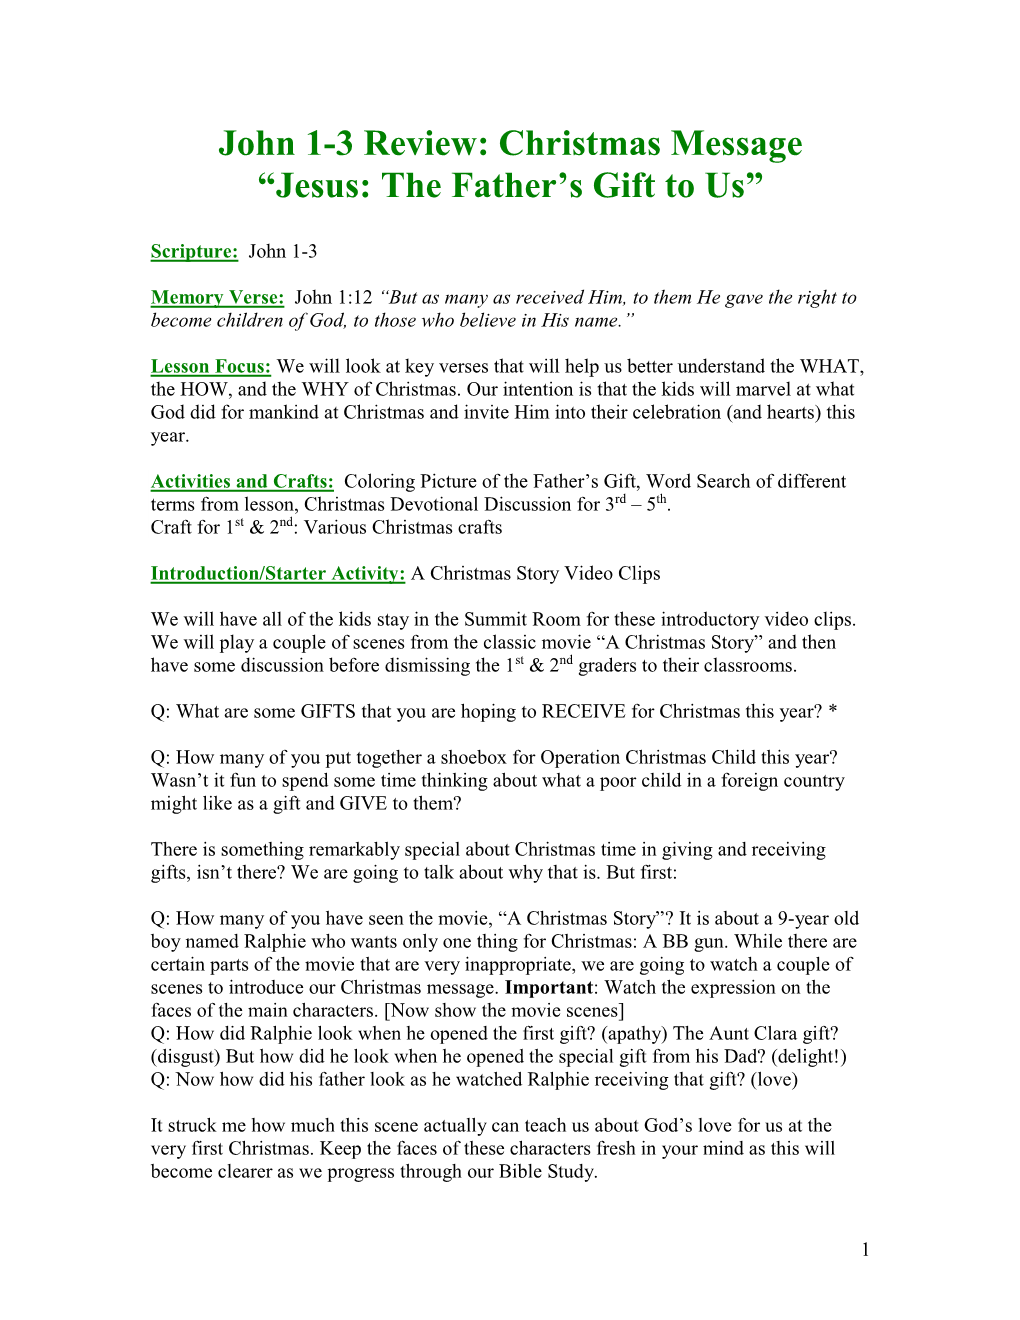 John 1-3 Review: Christmas Message “Jesus: the Father's Gift To